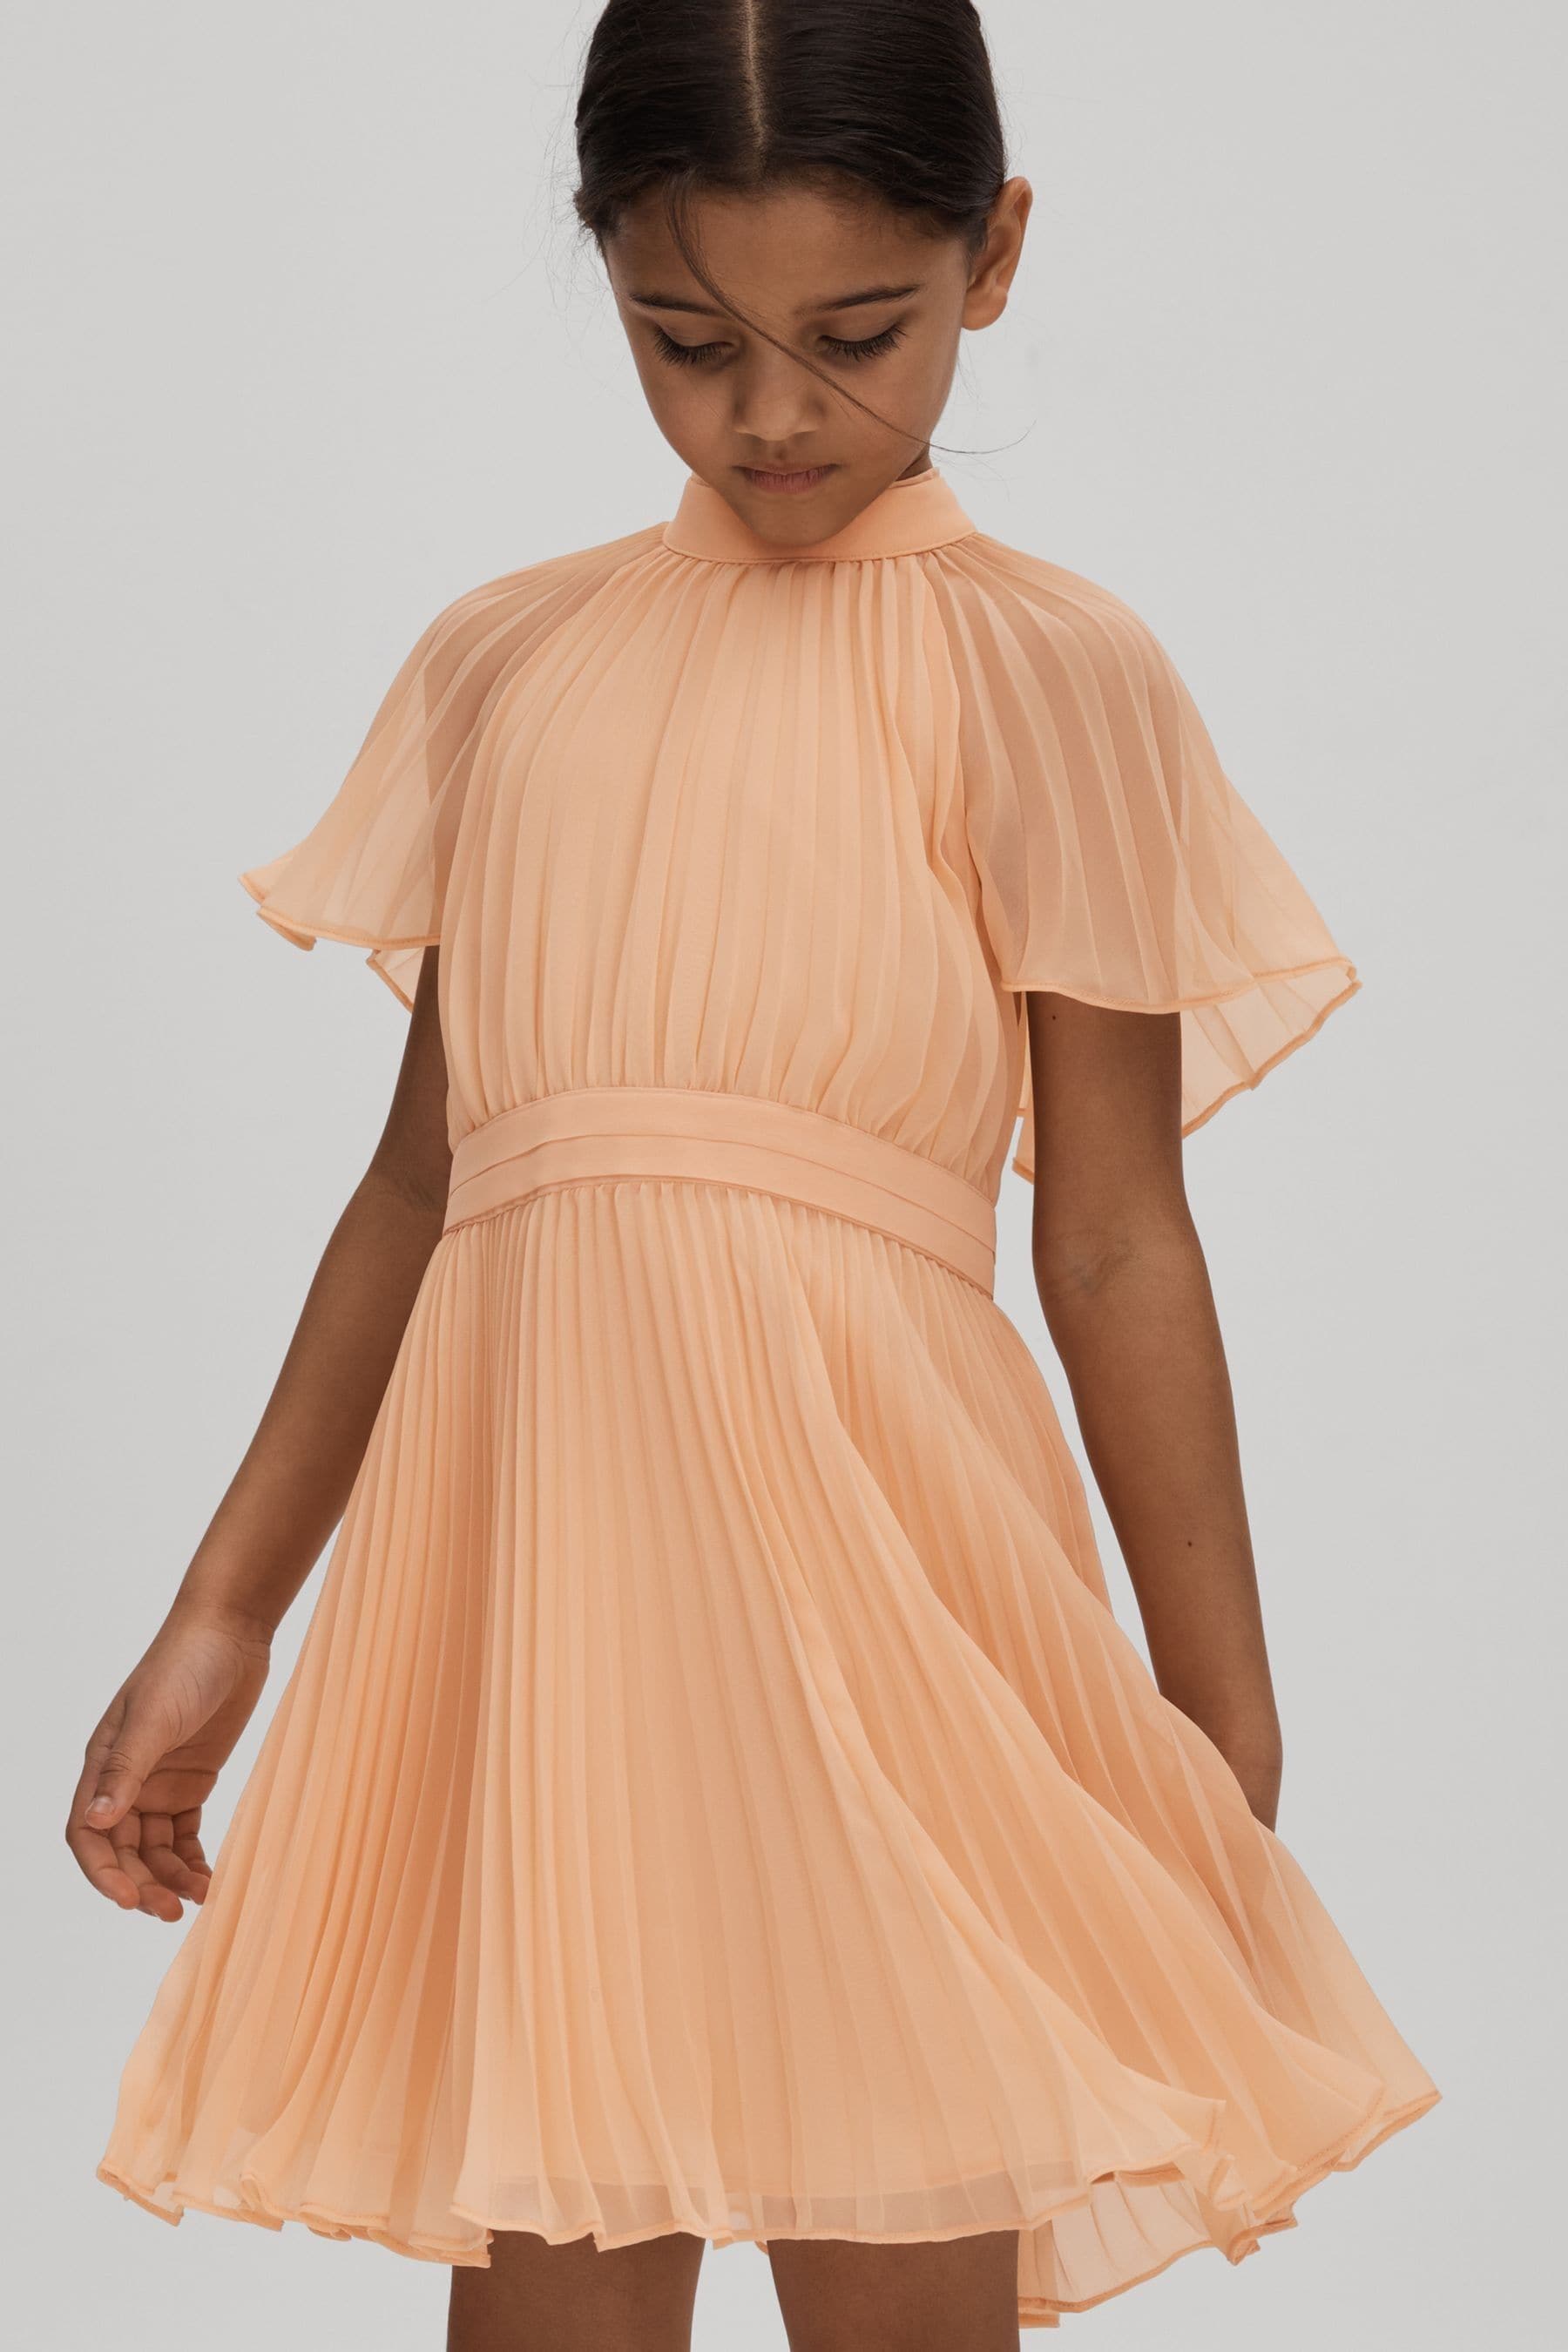 Reiss Kids' Verity - Apricot Junior Pleated Cape Sleeve Dress, Age 4-5 Years